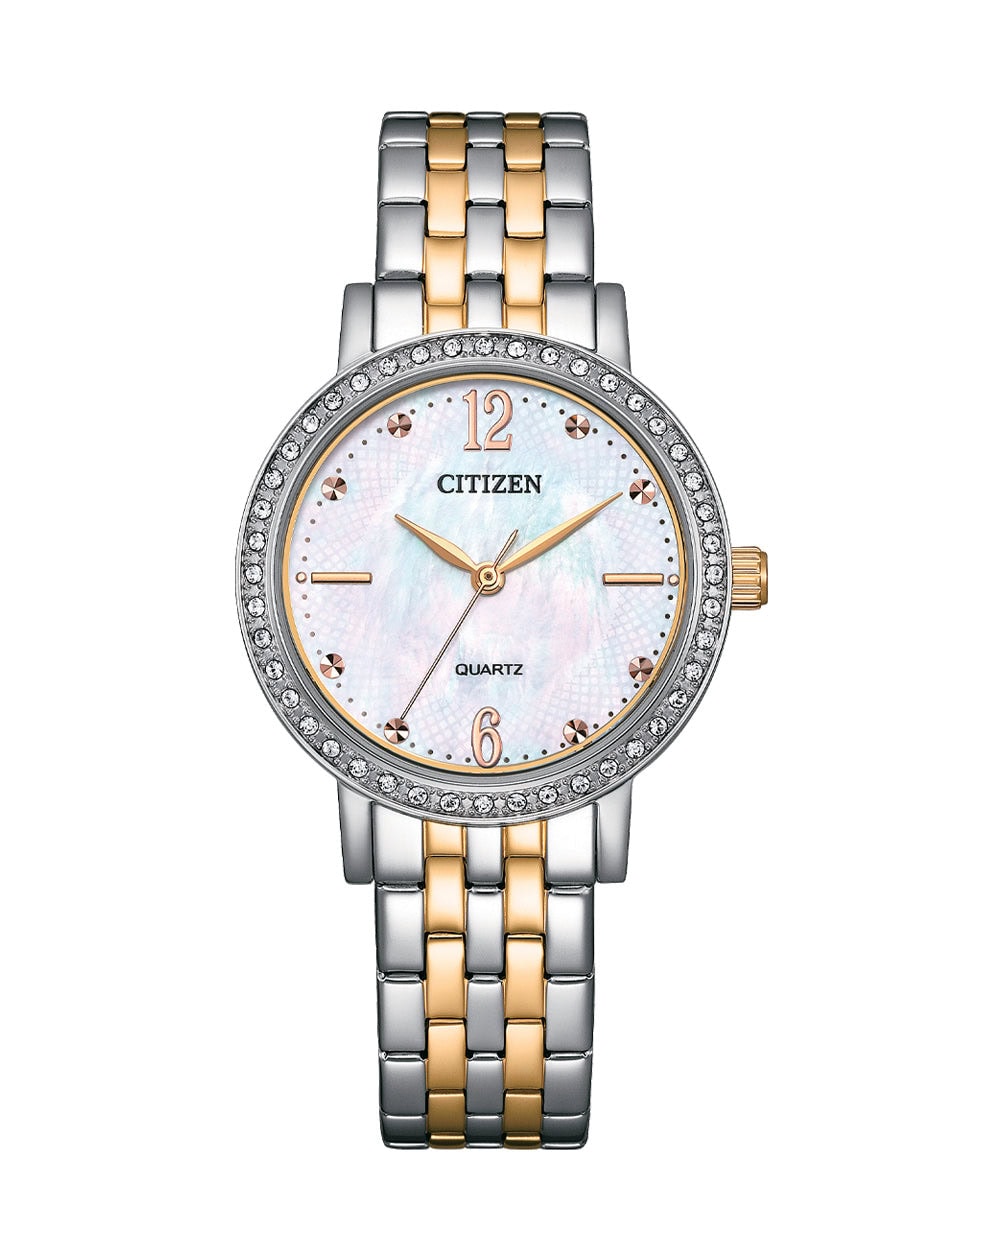 Citizen Ladie Bi-Tone Watch Dress Collection Quartz Technology Stainless Steel Case Mother of Pearl Dial 31mm Case Stainless Steel Bracelet, Push Button Buckle Band Mineral Crystal Glass 50 Meter Water Resistant Spectacular in appearance and masterfully crafted, this watch is the embodiment of style. Punctuated by two-tone case with elegant white dial, the bezel is resplendent with sparkling crystal elements. Offering sophisticated beauty for women looking for something special and versatile enough to be worn daily. With quartz reliability, style and beauty have never been so accessible_0